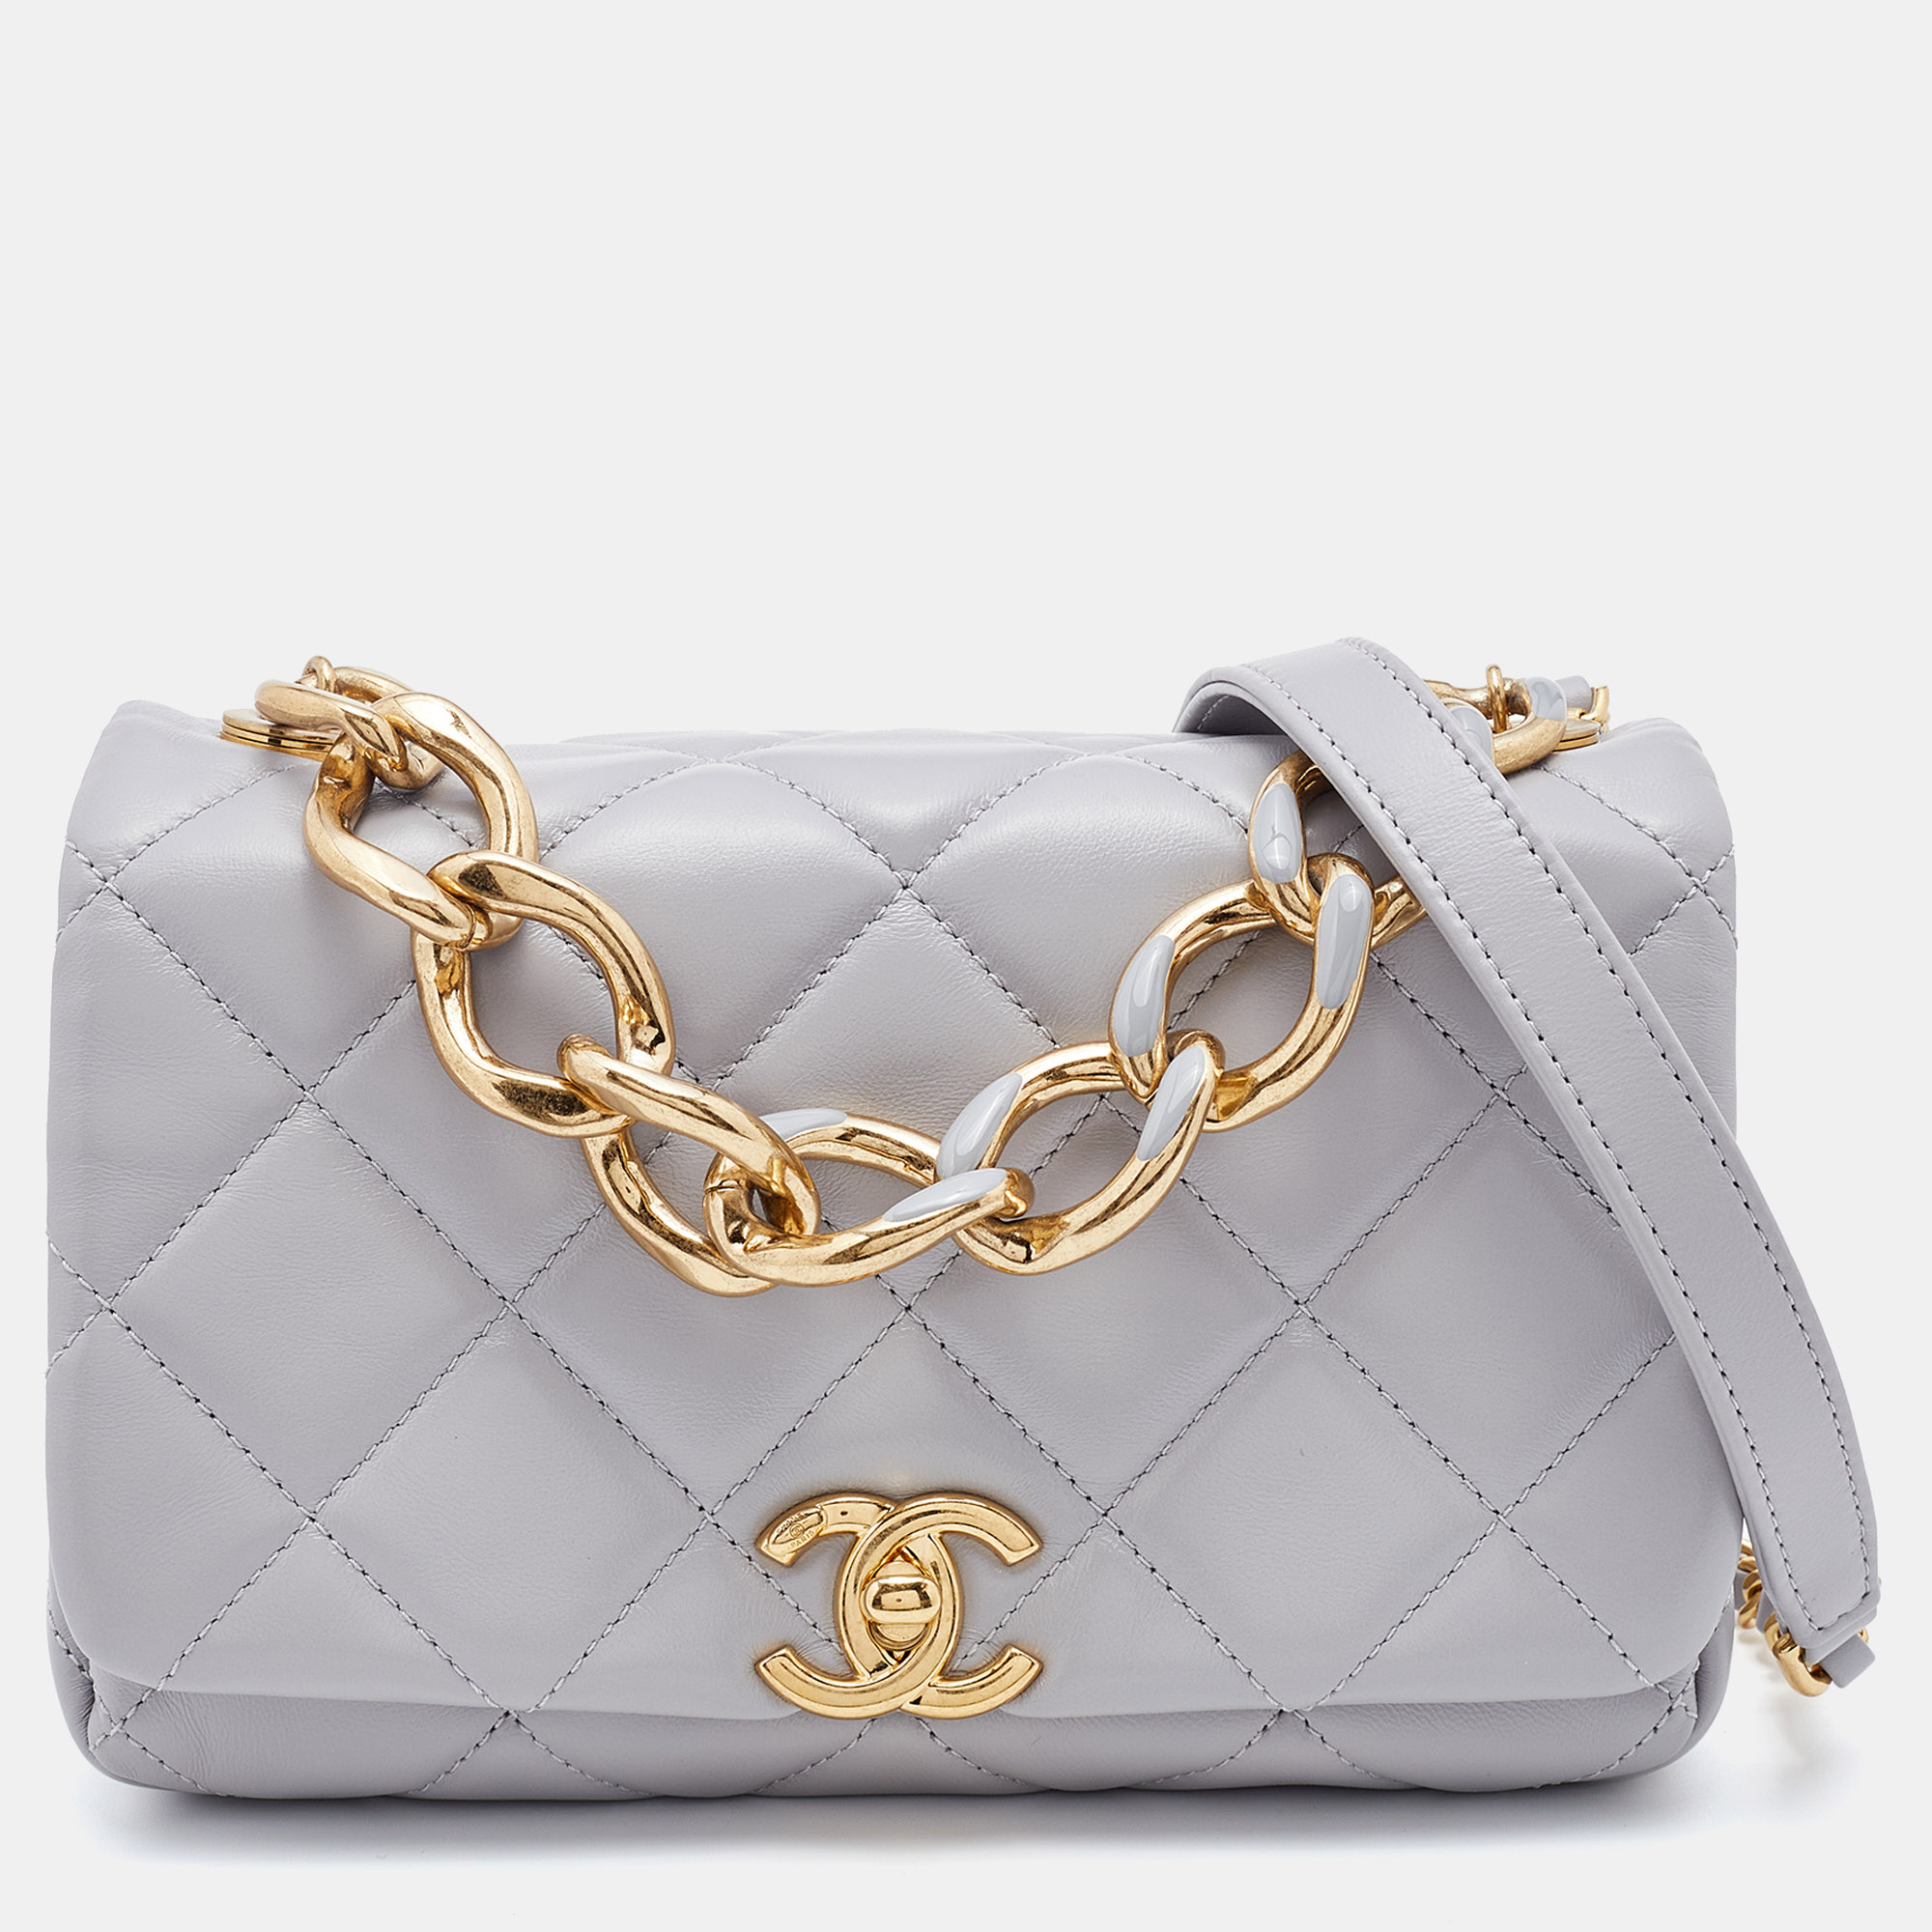 Chanel Grey Quilted Leather Medium Color Match Flap Bag Chanel | TLC